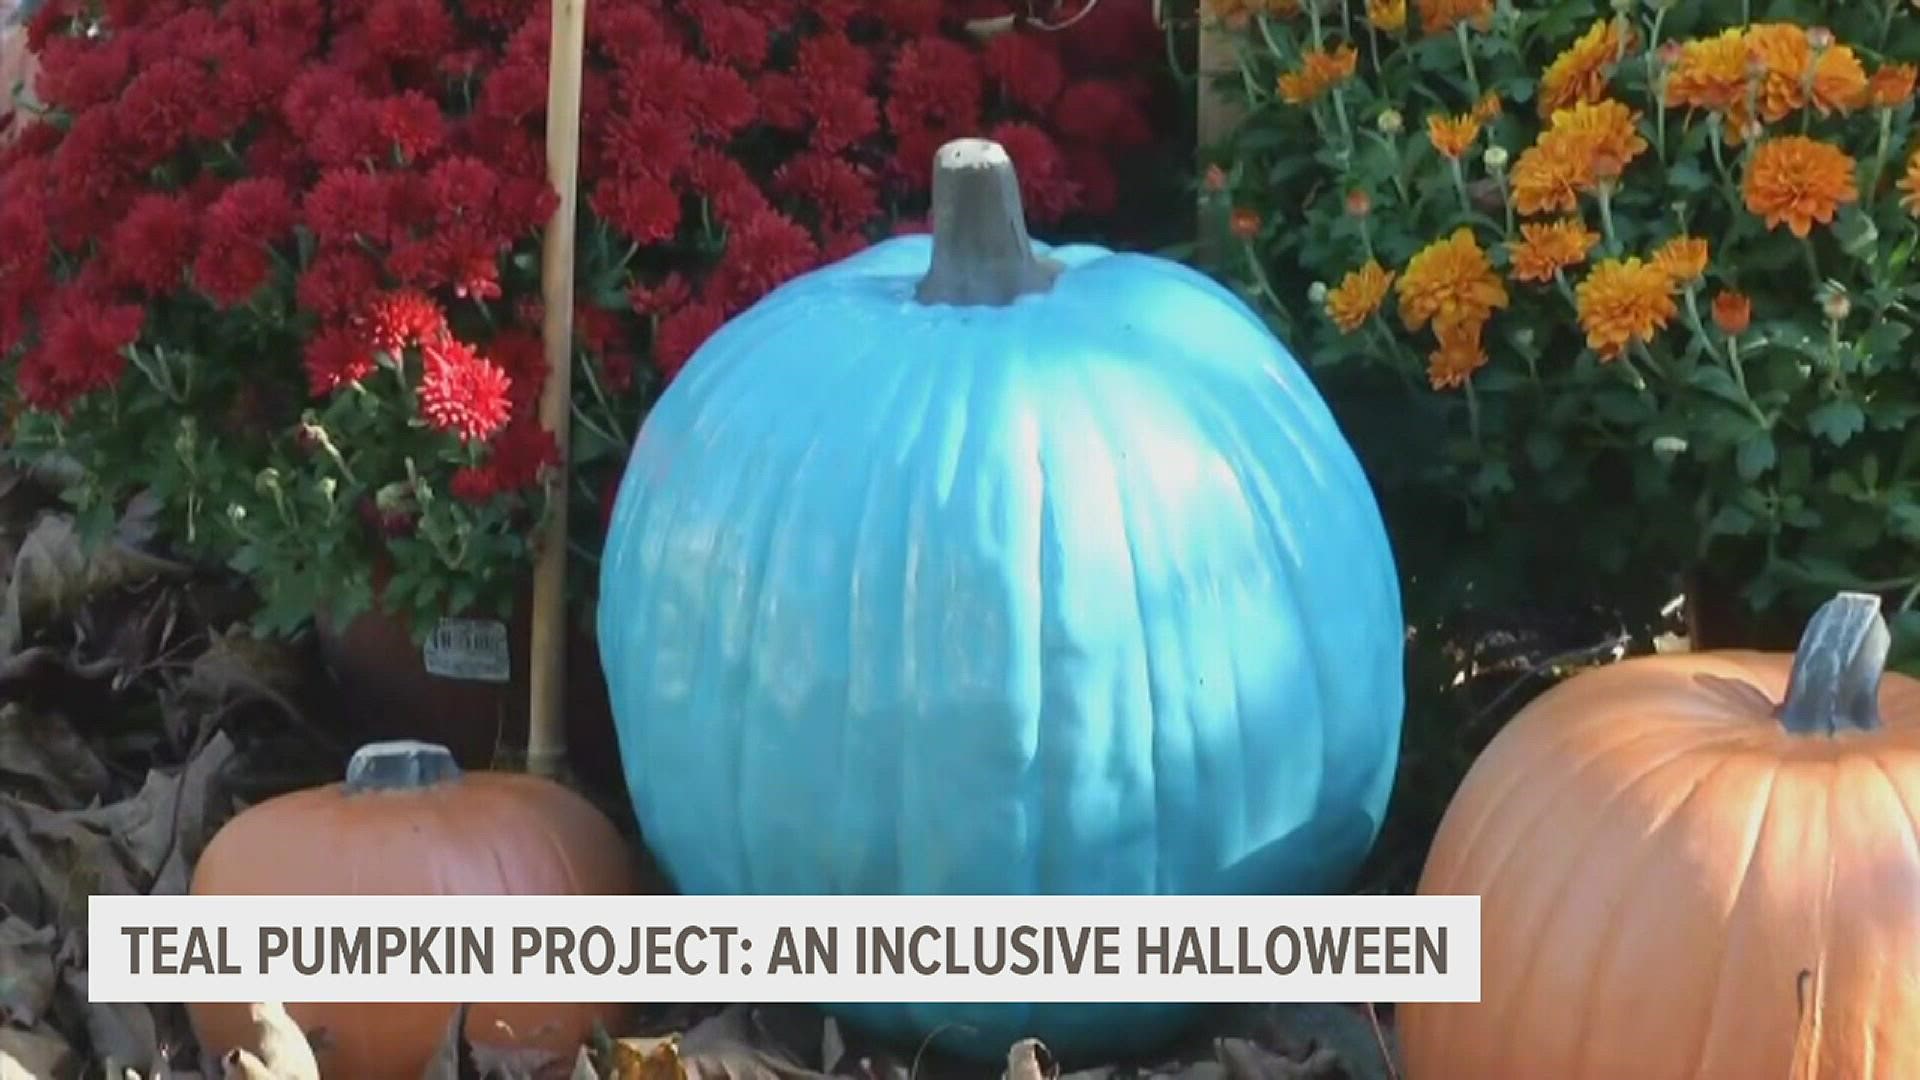 More than 32 million Americans suffer from food allergies — that's one in 13 kids. The Teal Pumpkin Project aims to ensure every trick-or-treater has a fun Halloween